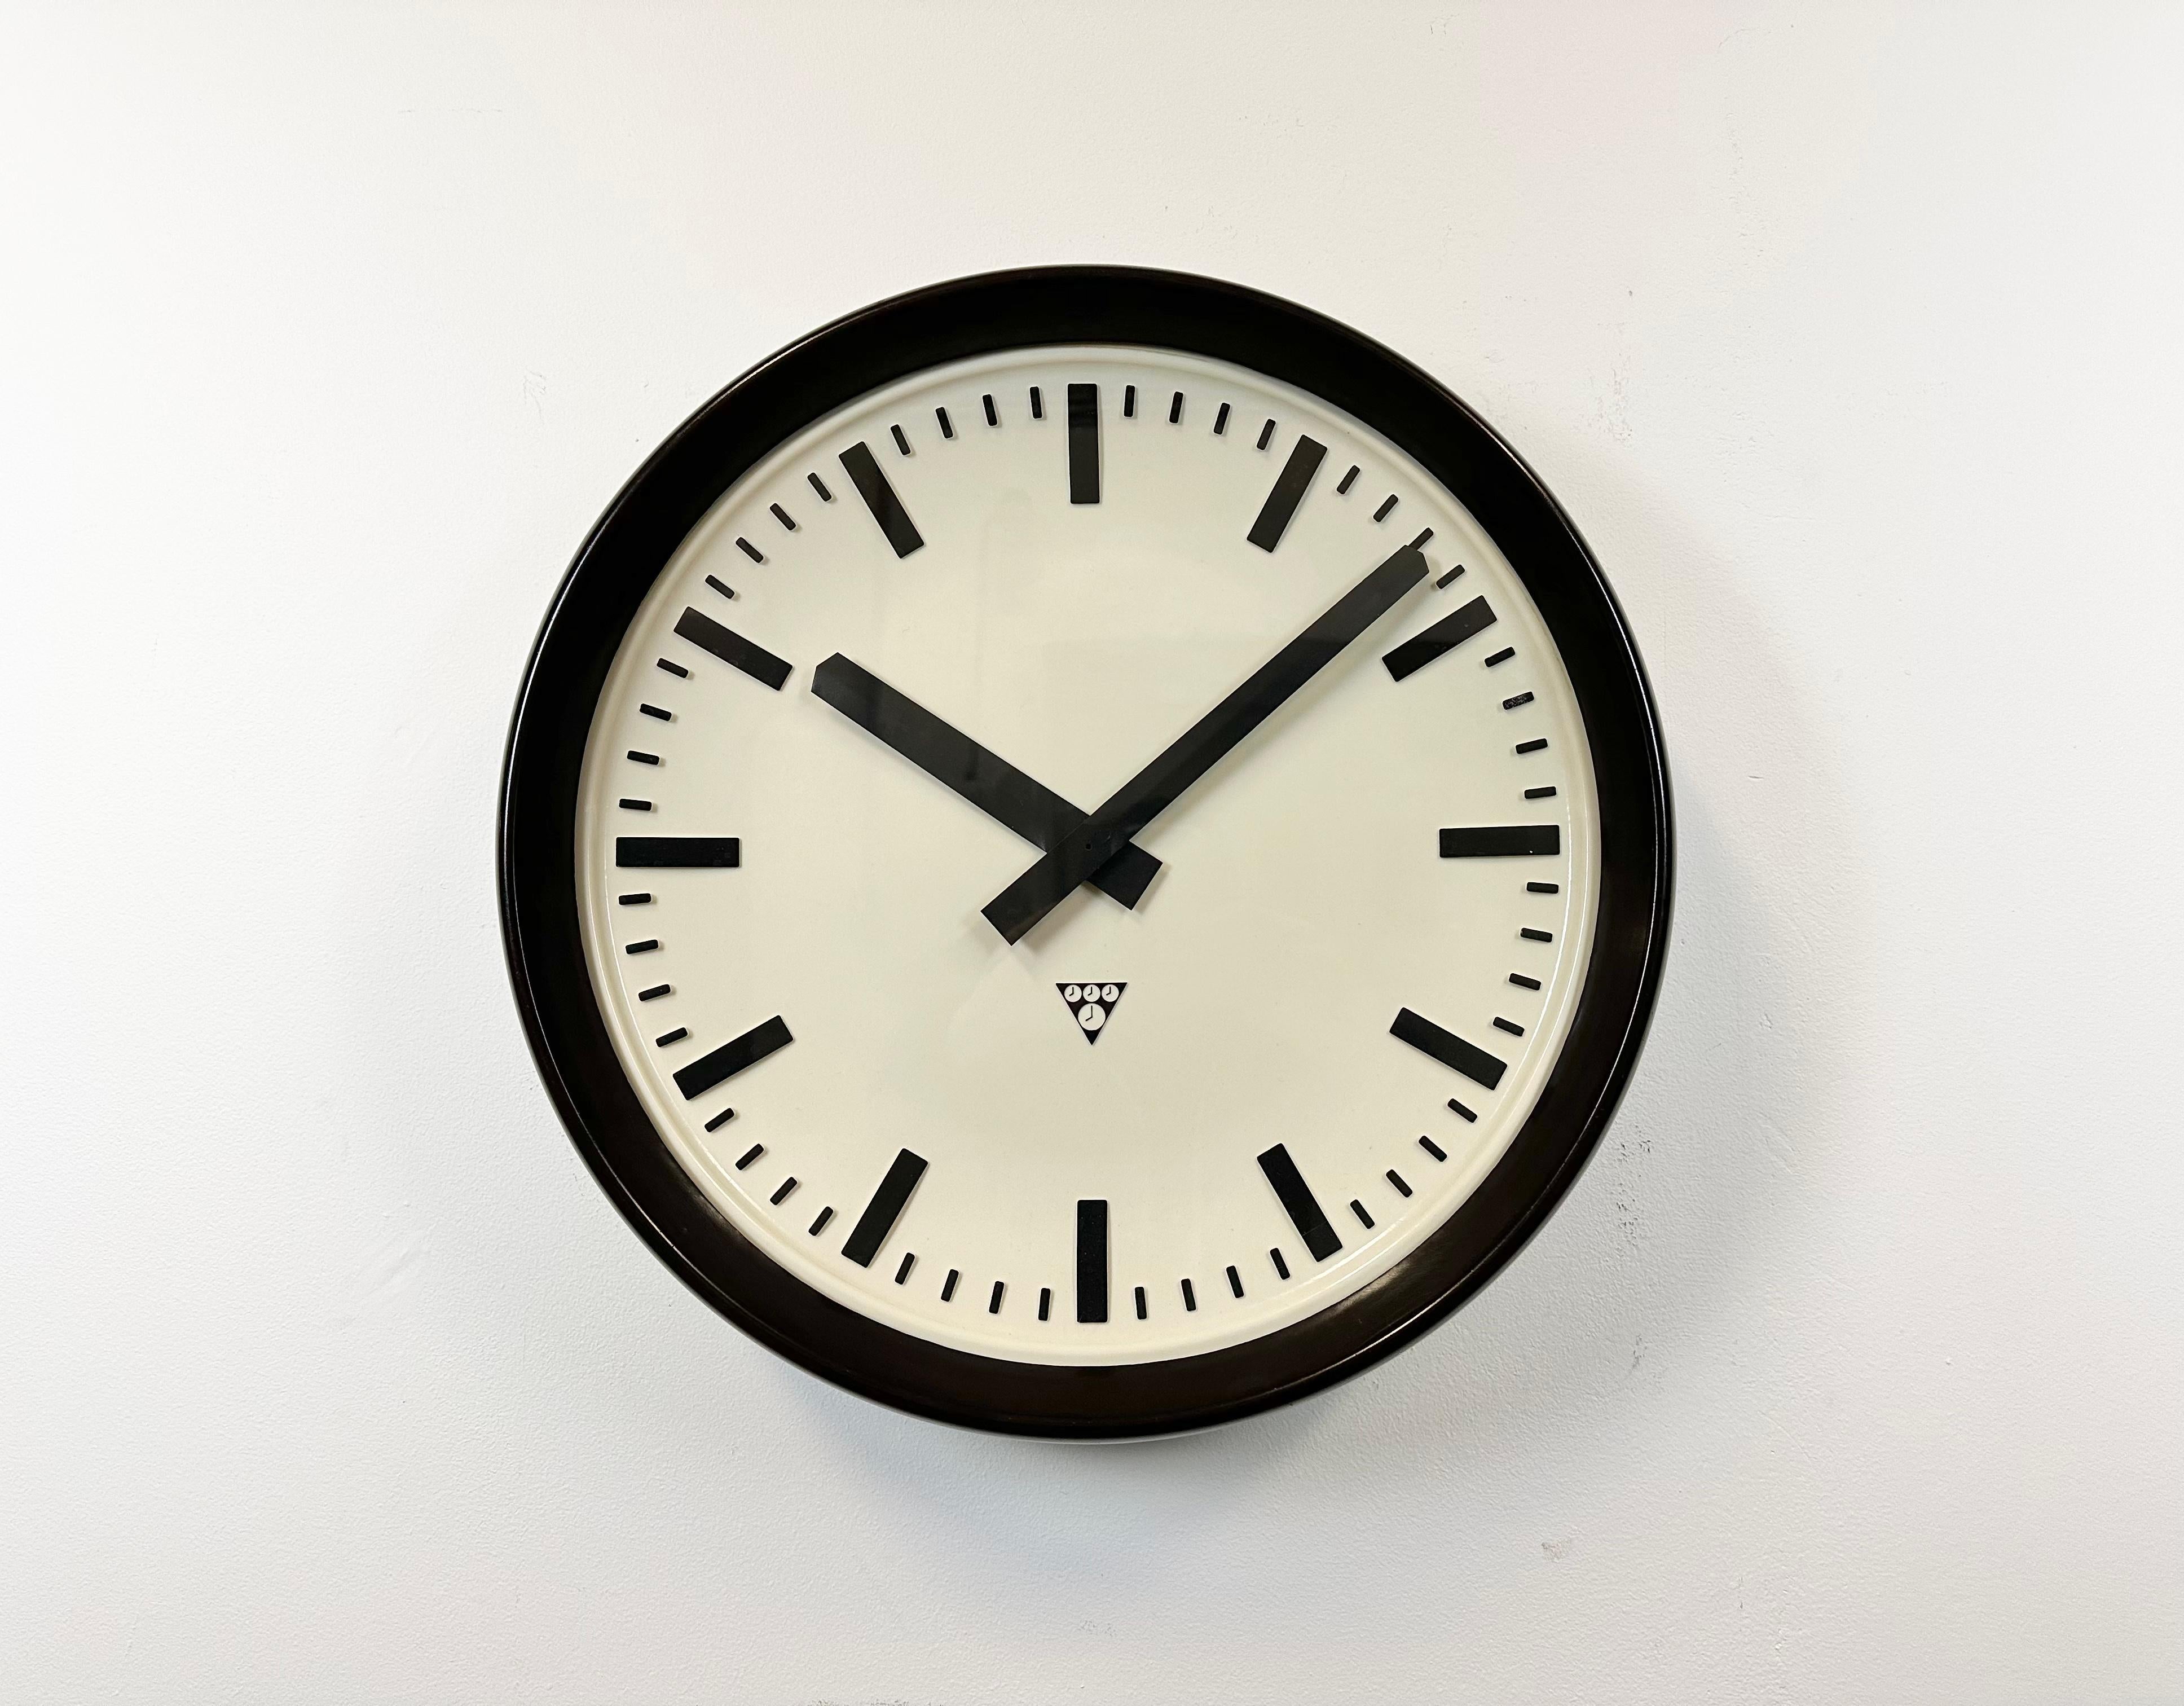 This large wall clock was produced by Pragotron in former Czechoslovakia during the 1960s. It features a brown bakelite frame, a white bakelite dial, an aluminium hands, a clear glass cover and brown bakelite back.The piece has been converted into a